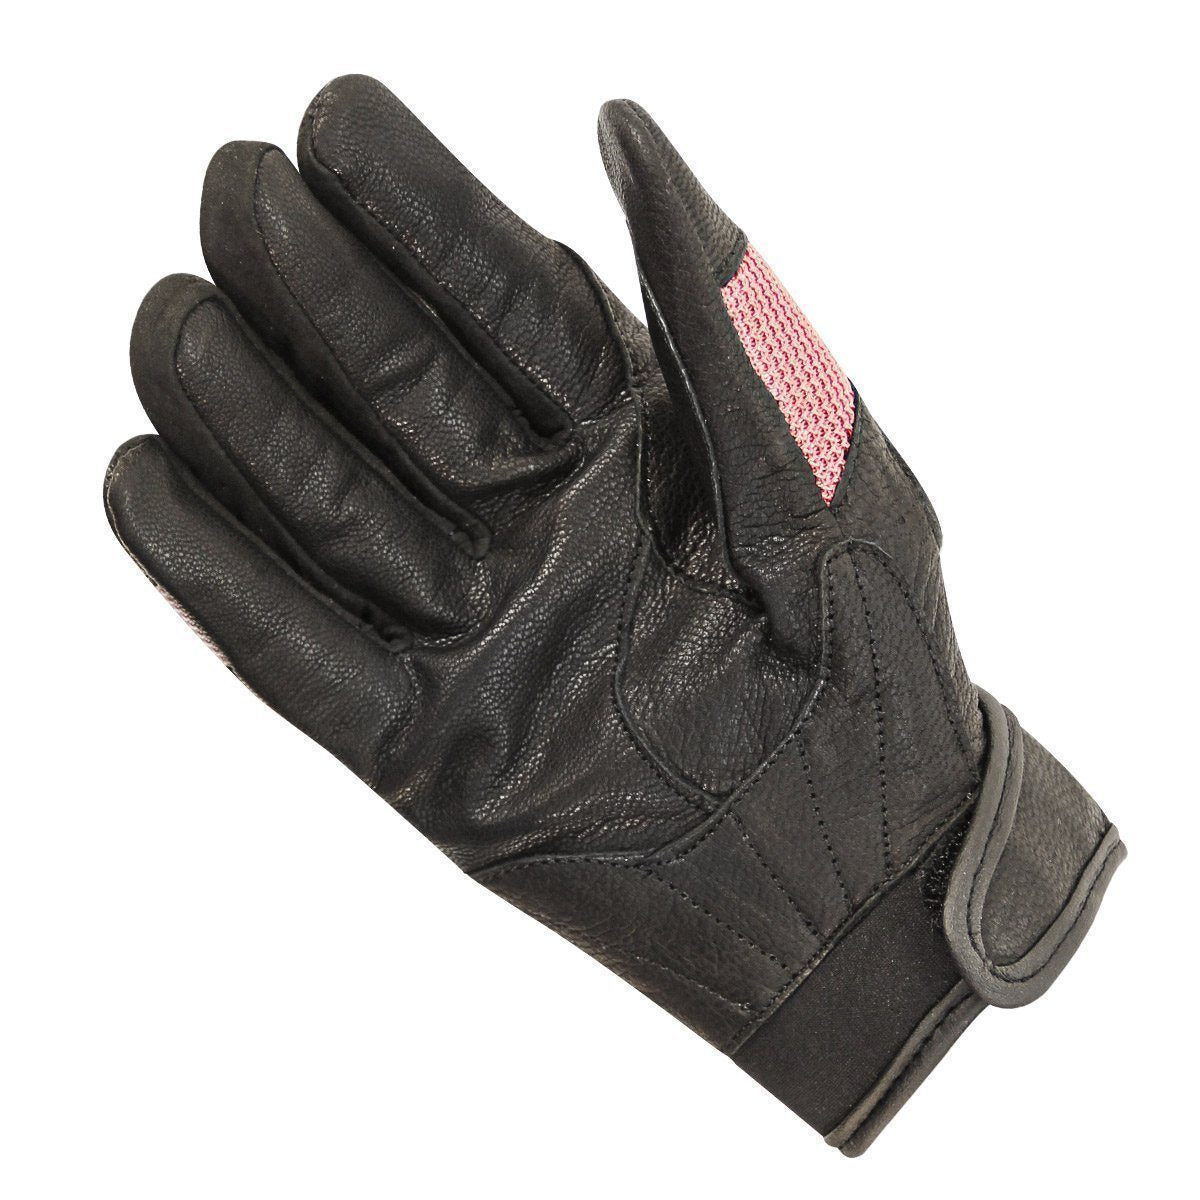 Xelement XG80206 Women's Black and Pink Mesh Cool Rider Motorcycle Gloves